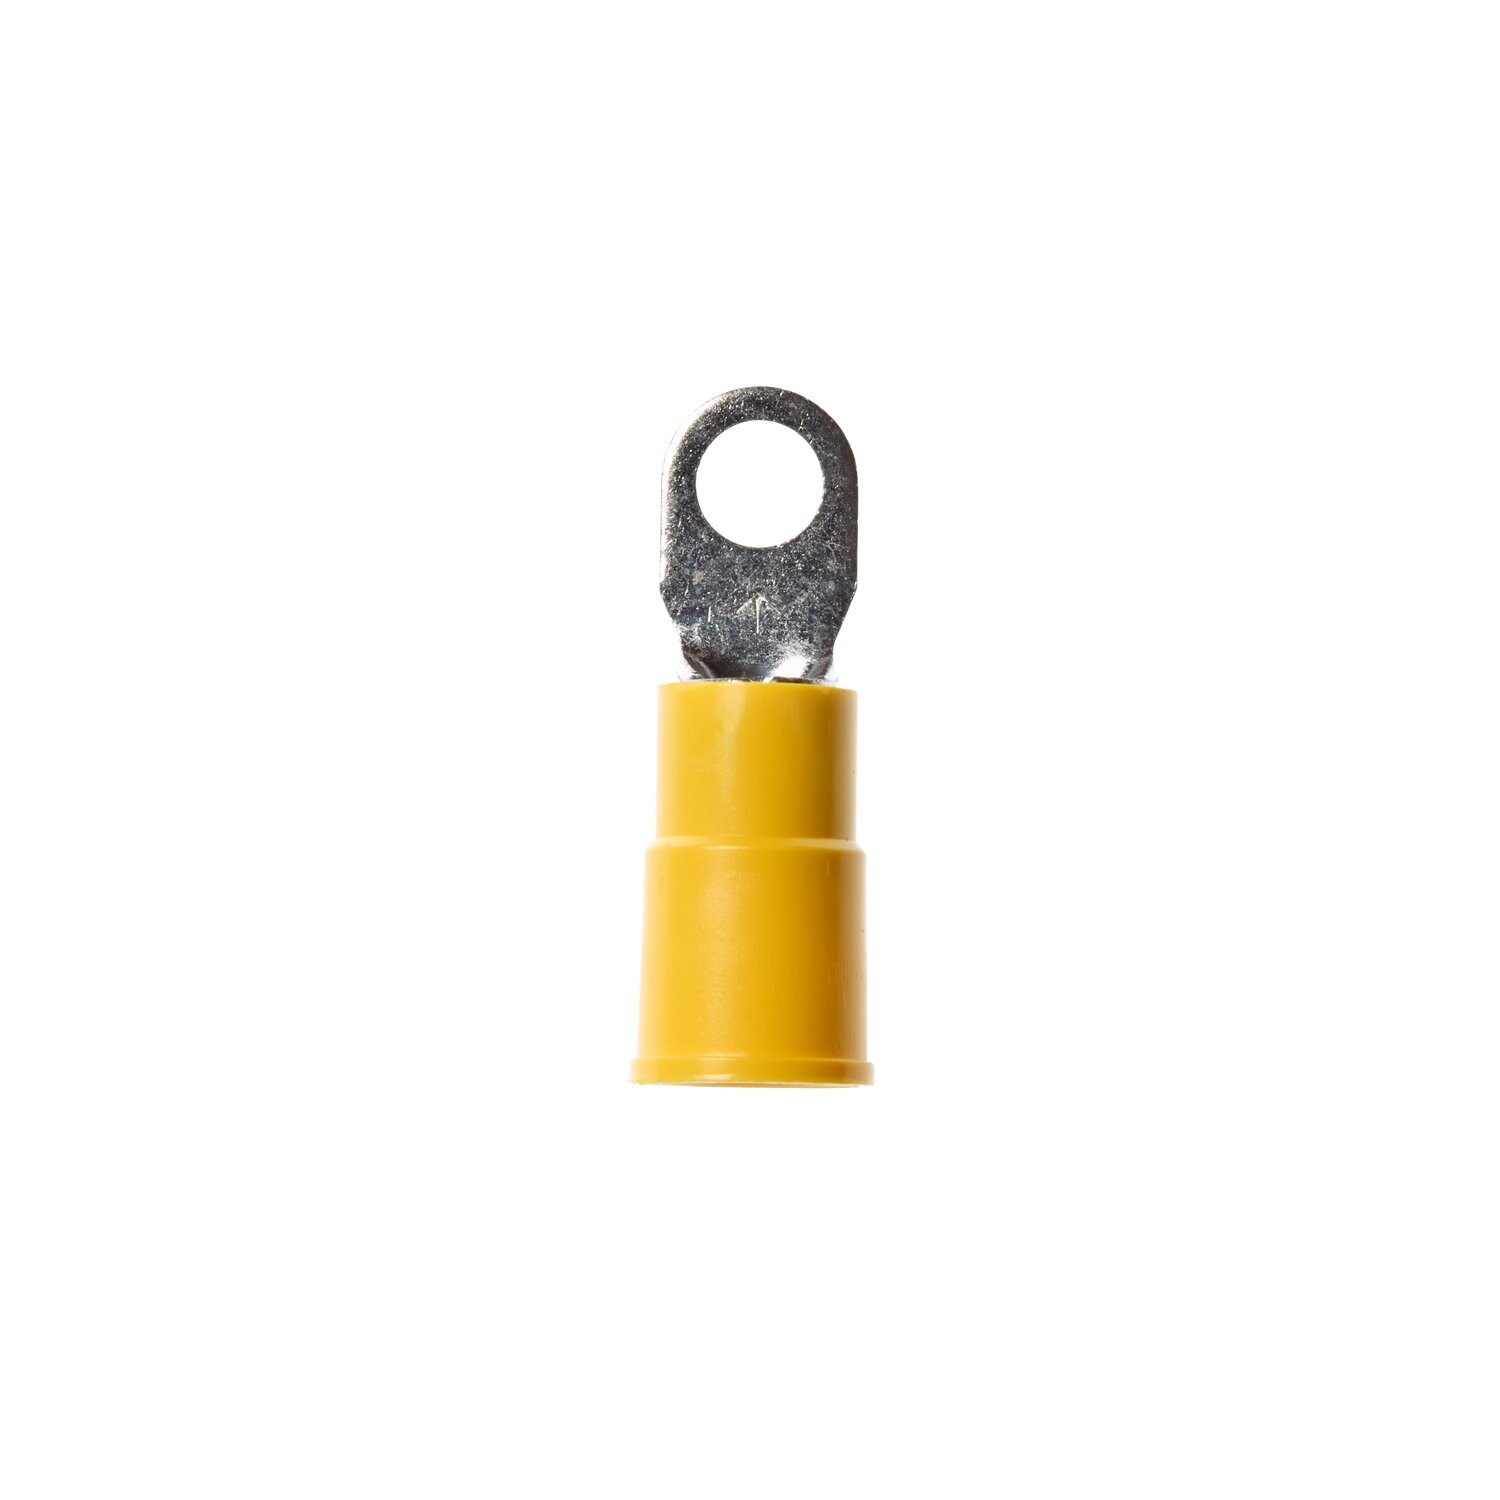 7100164093 - 3M Scotchlok Ring Tongue, Vinyl Insulated Butted Seam MVU10-8RK,
500/case, standard-style ring tongue fits around the stud